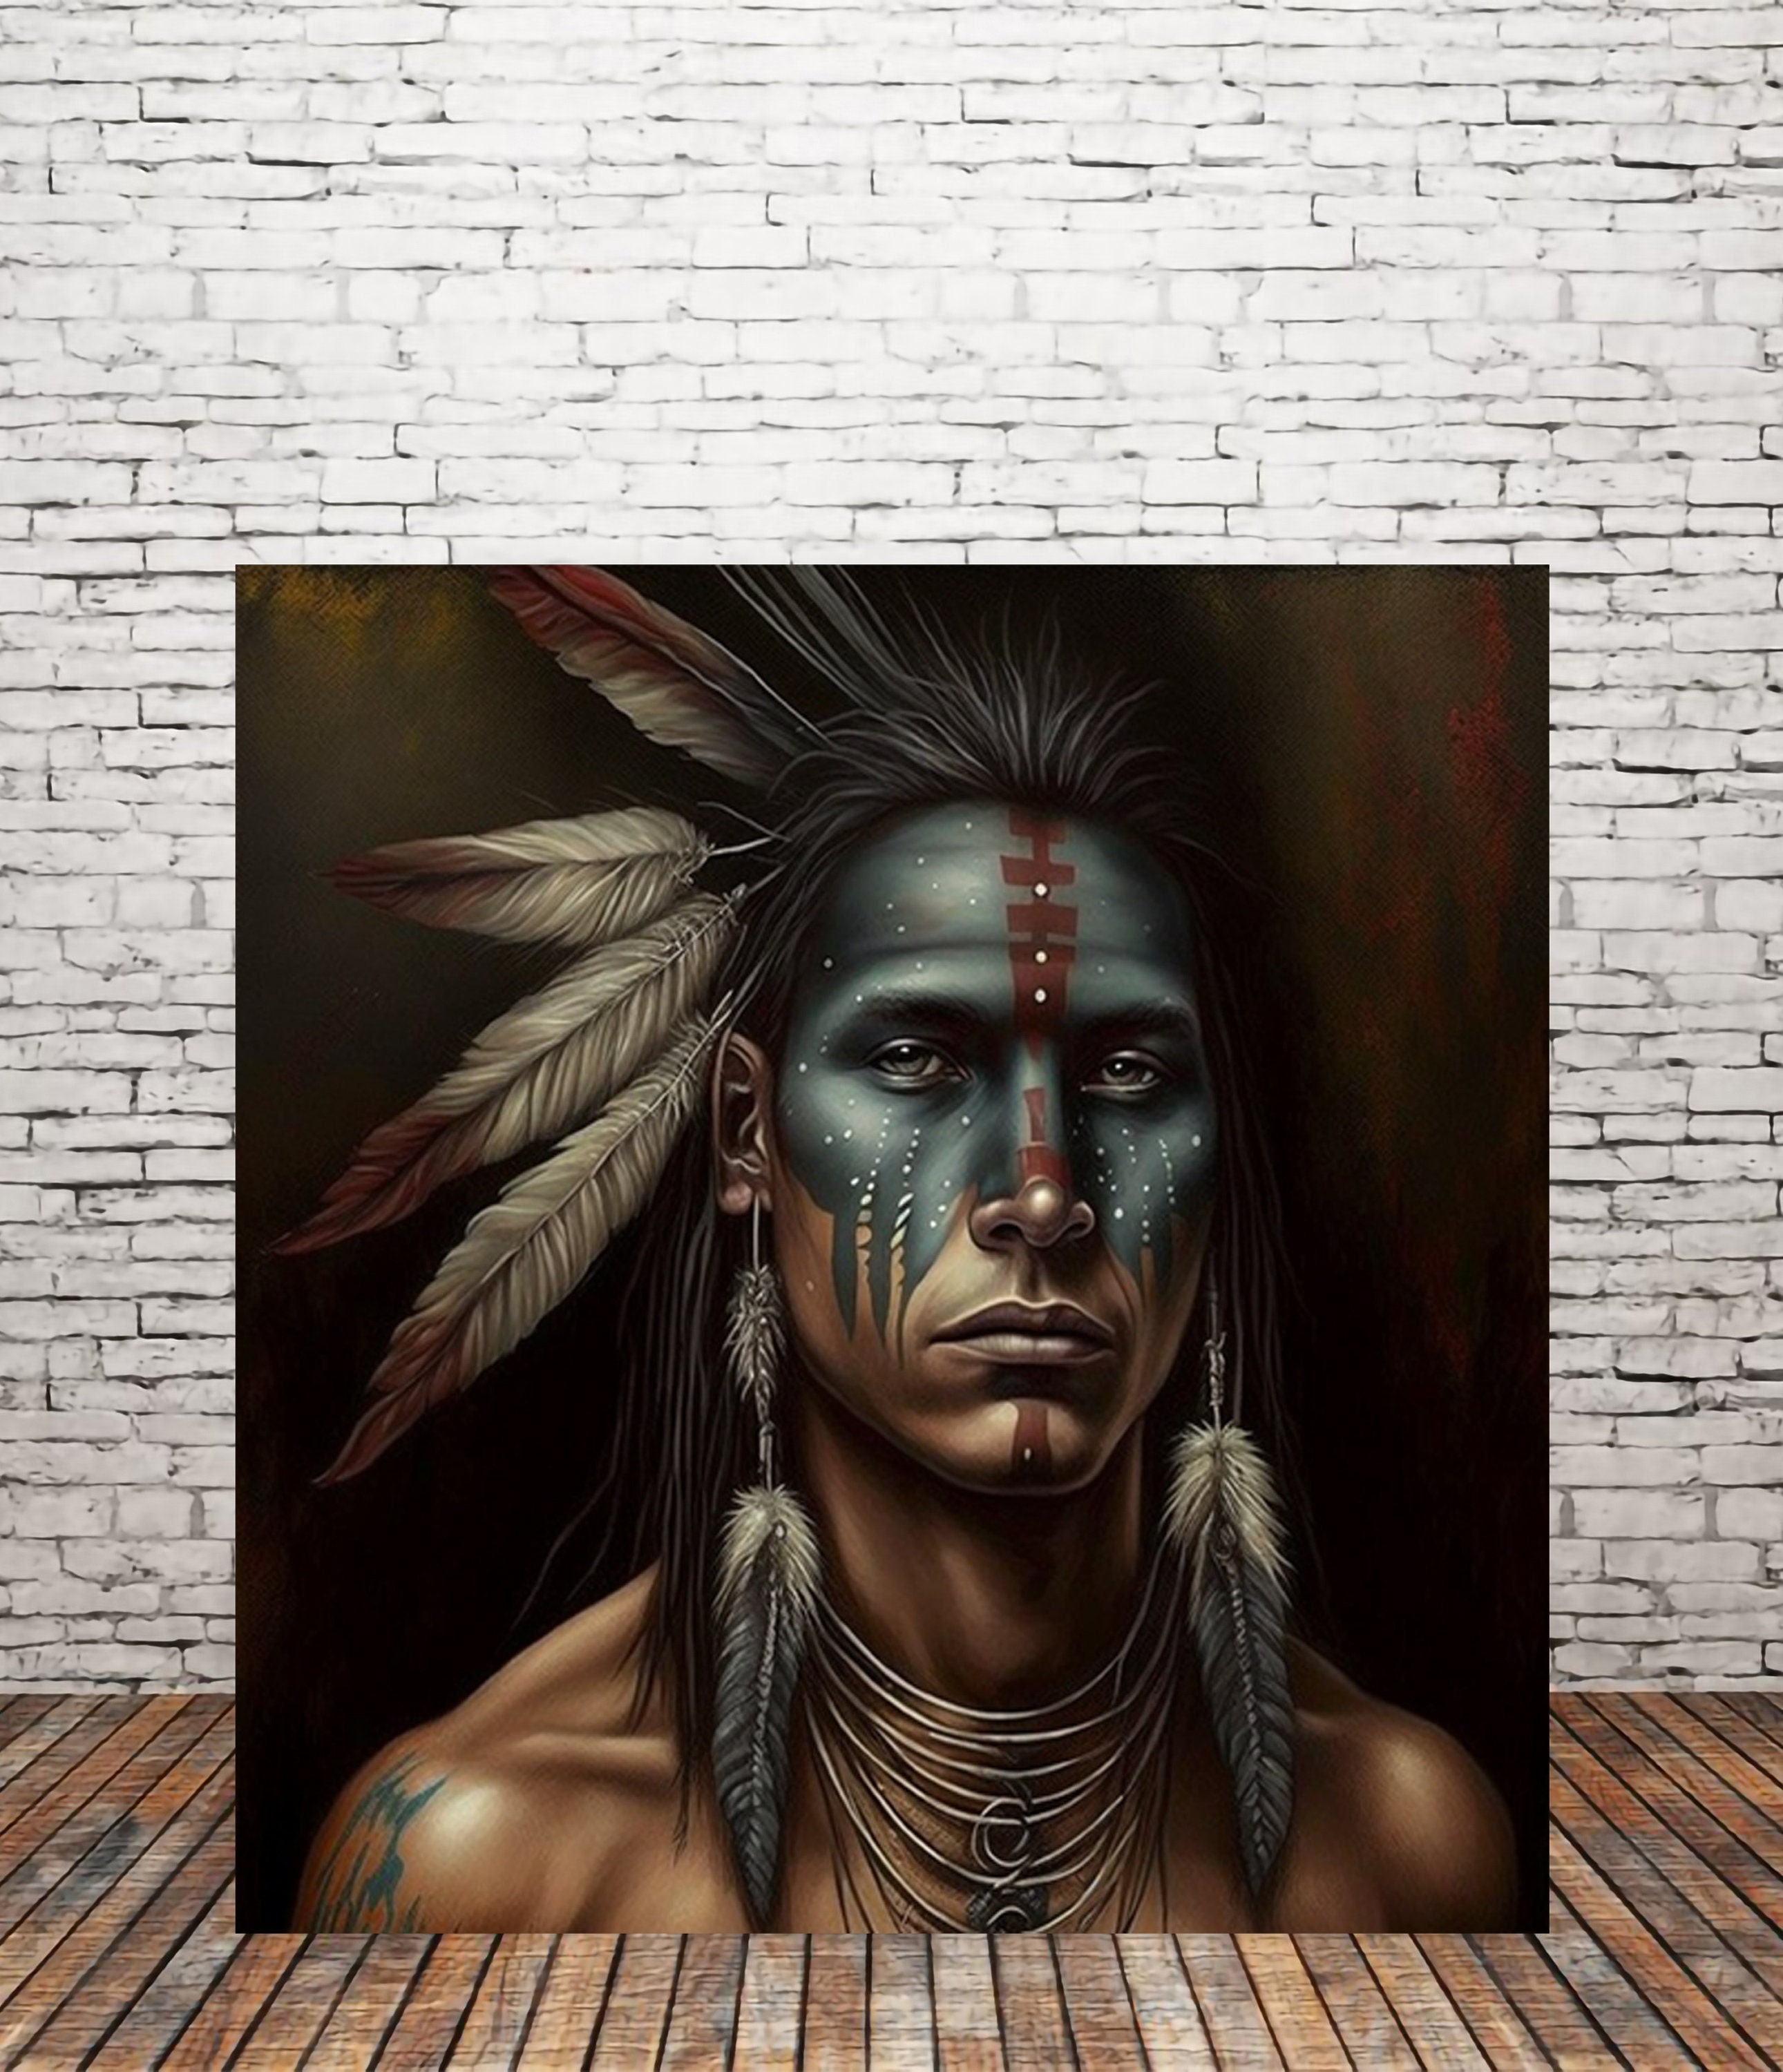 Tribal Wars Now A Canvas App on Facebook